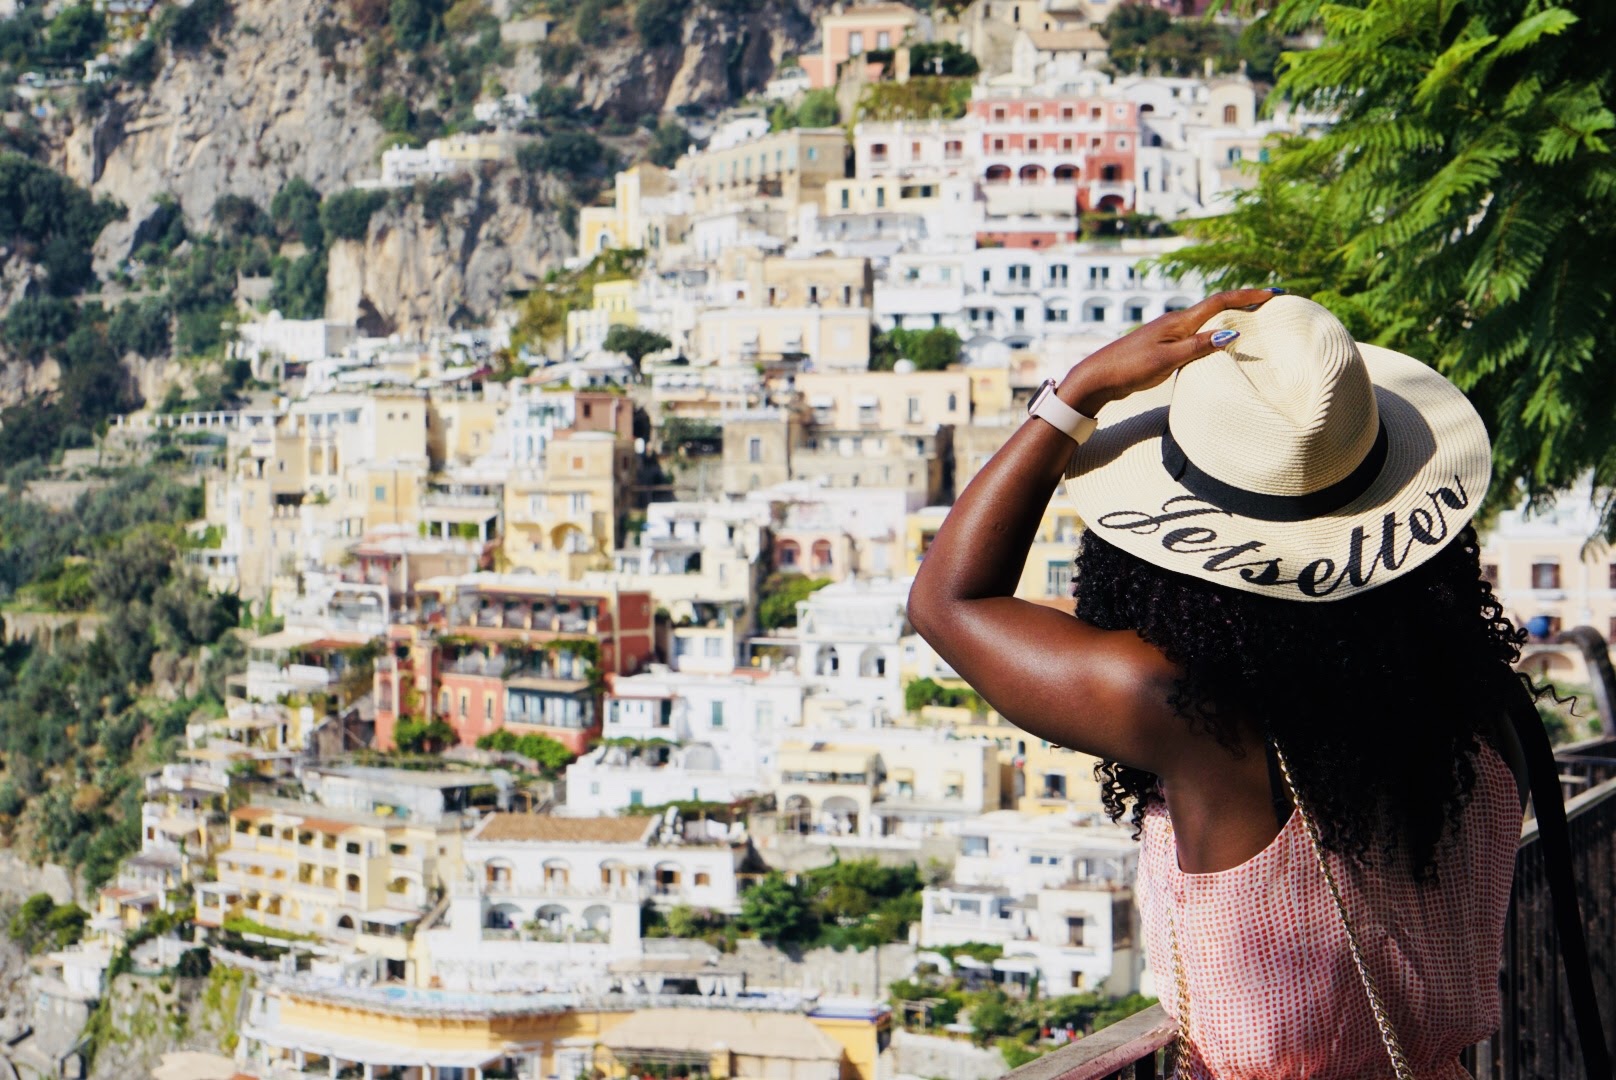 Traveler Of The Week: Solo Travel Helped Neema View The World Differently